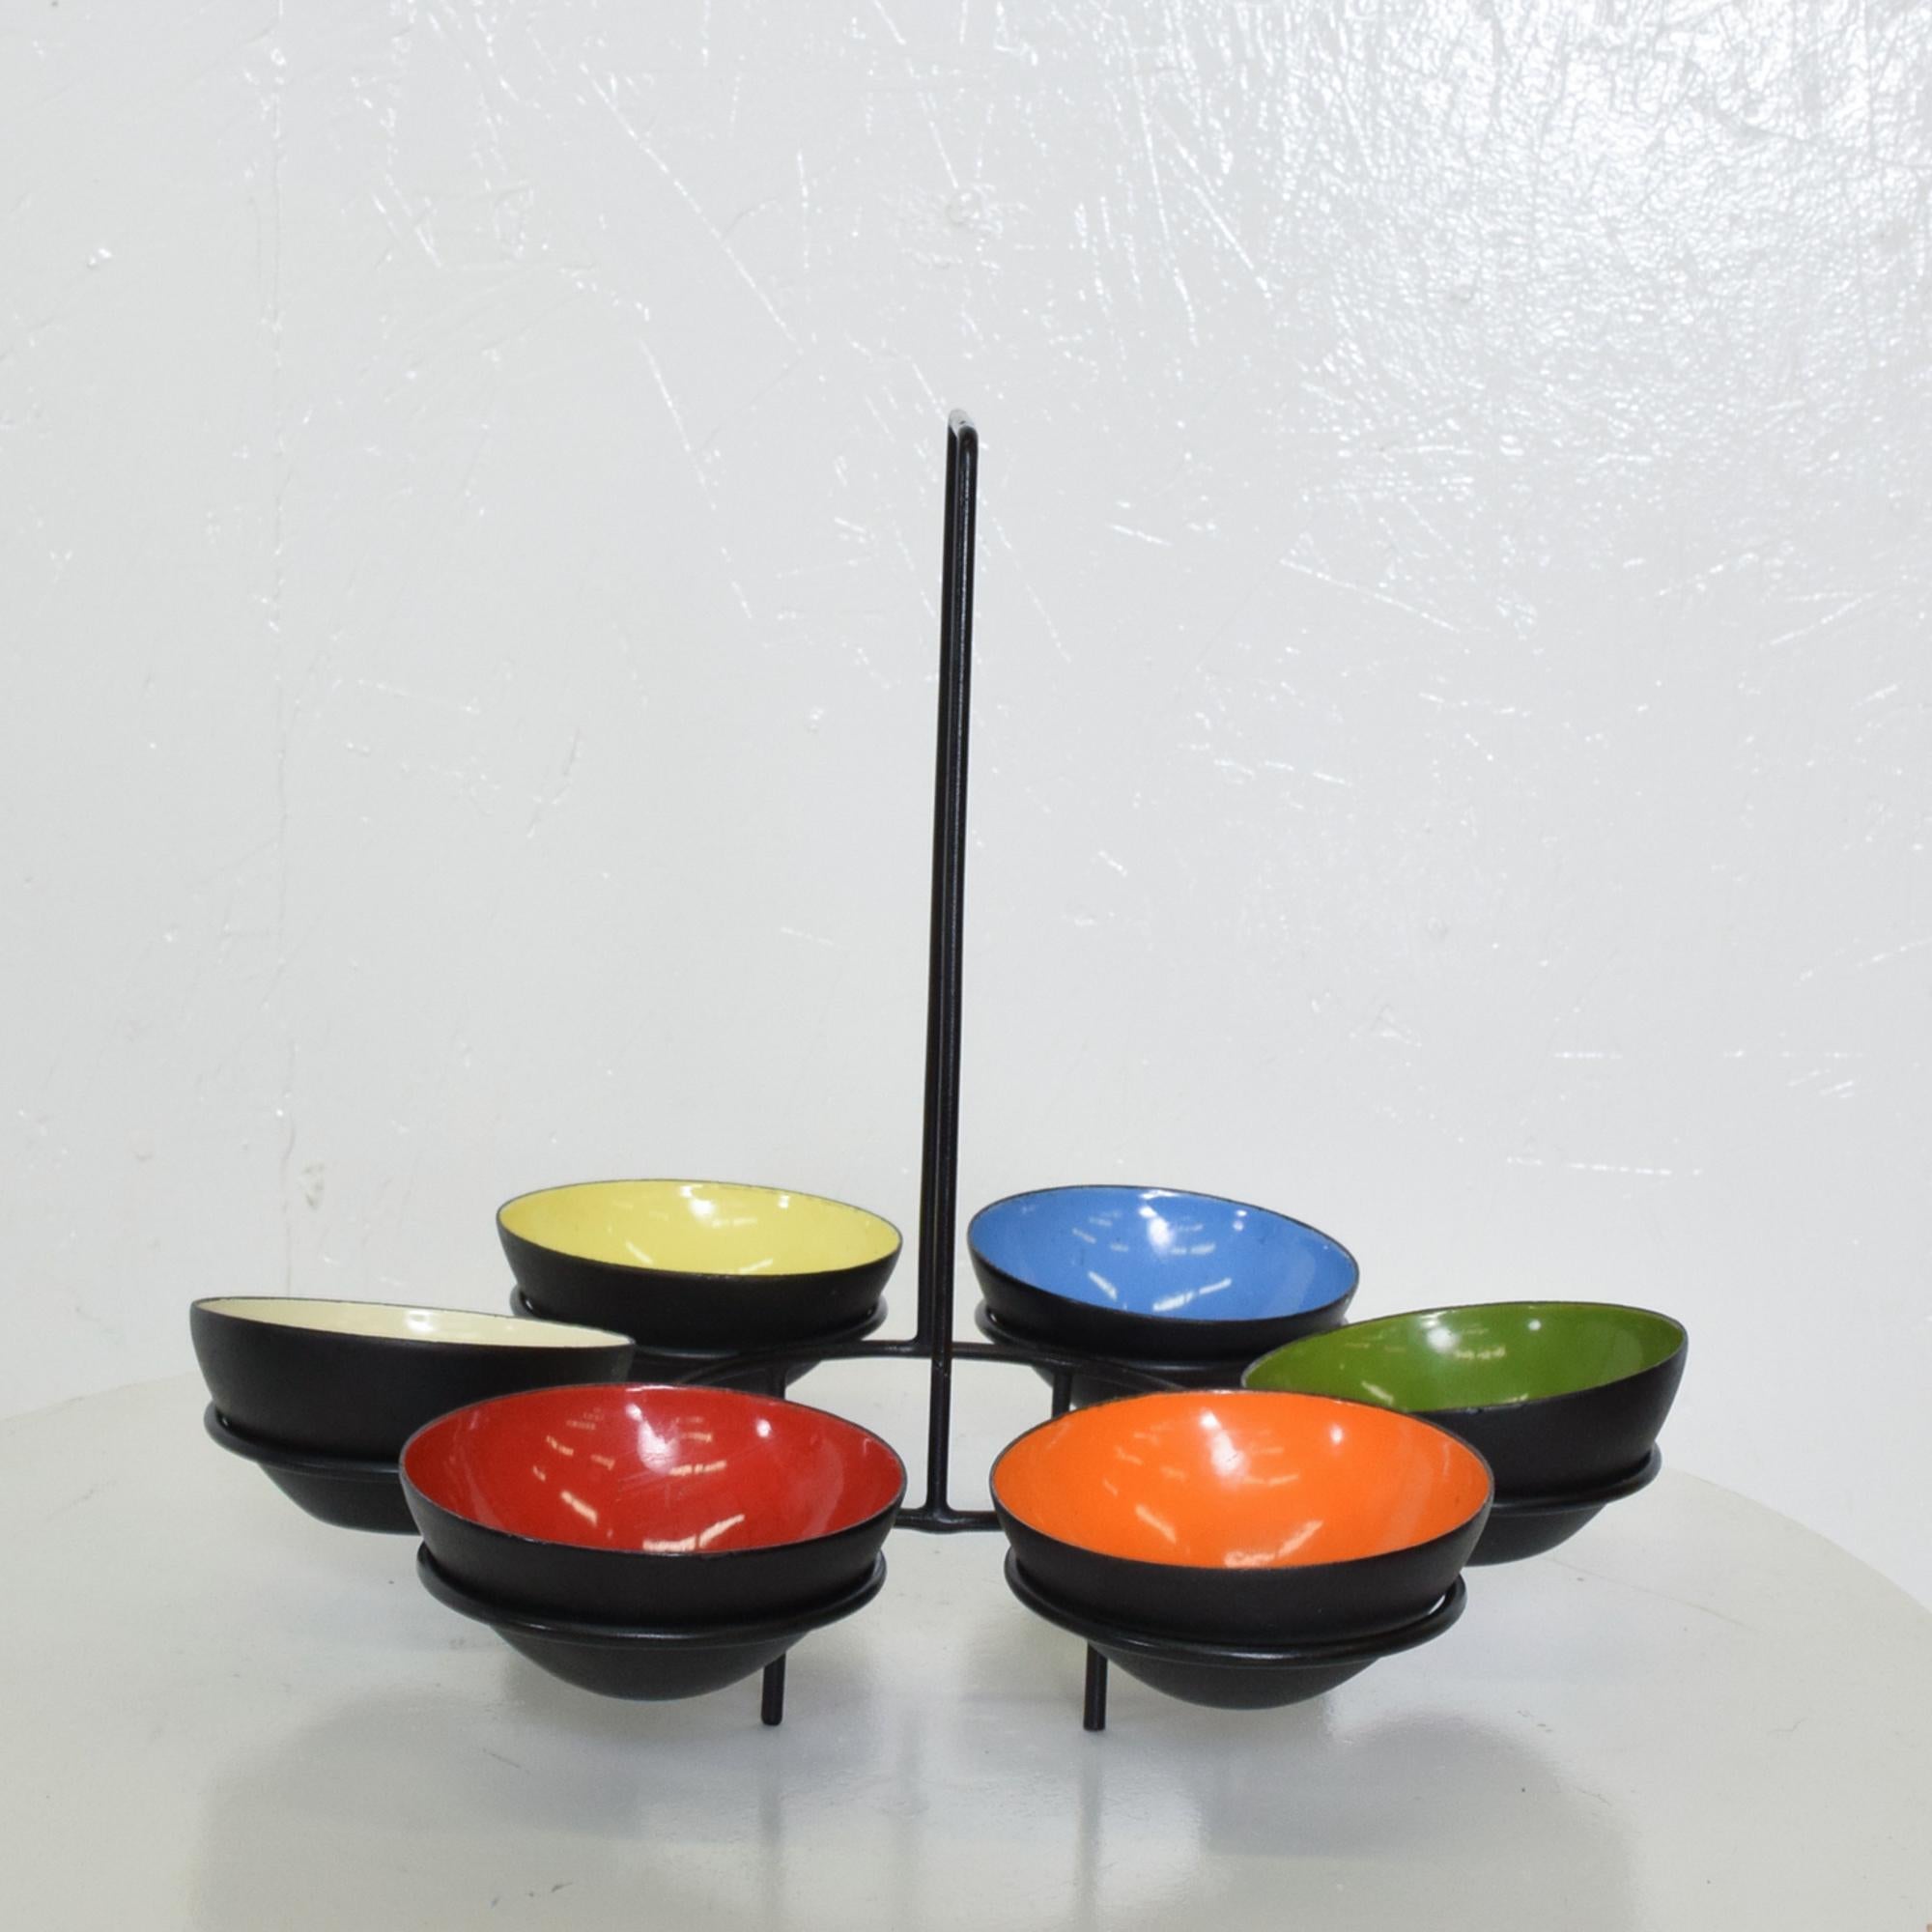 AMBIANIC presents
1950s Herbert Krenchel Colorful Enamel Serving Bowls Set of Six Denmark.
No label remains. Ghost label visible on one bowl.
Copper enamel and iron.
Extraordinary 1954 design Krenit bowls
10 H x 12 in diameter, Bowl 3.5 diameter x